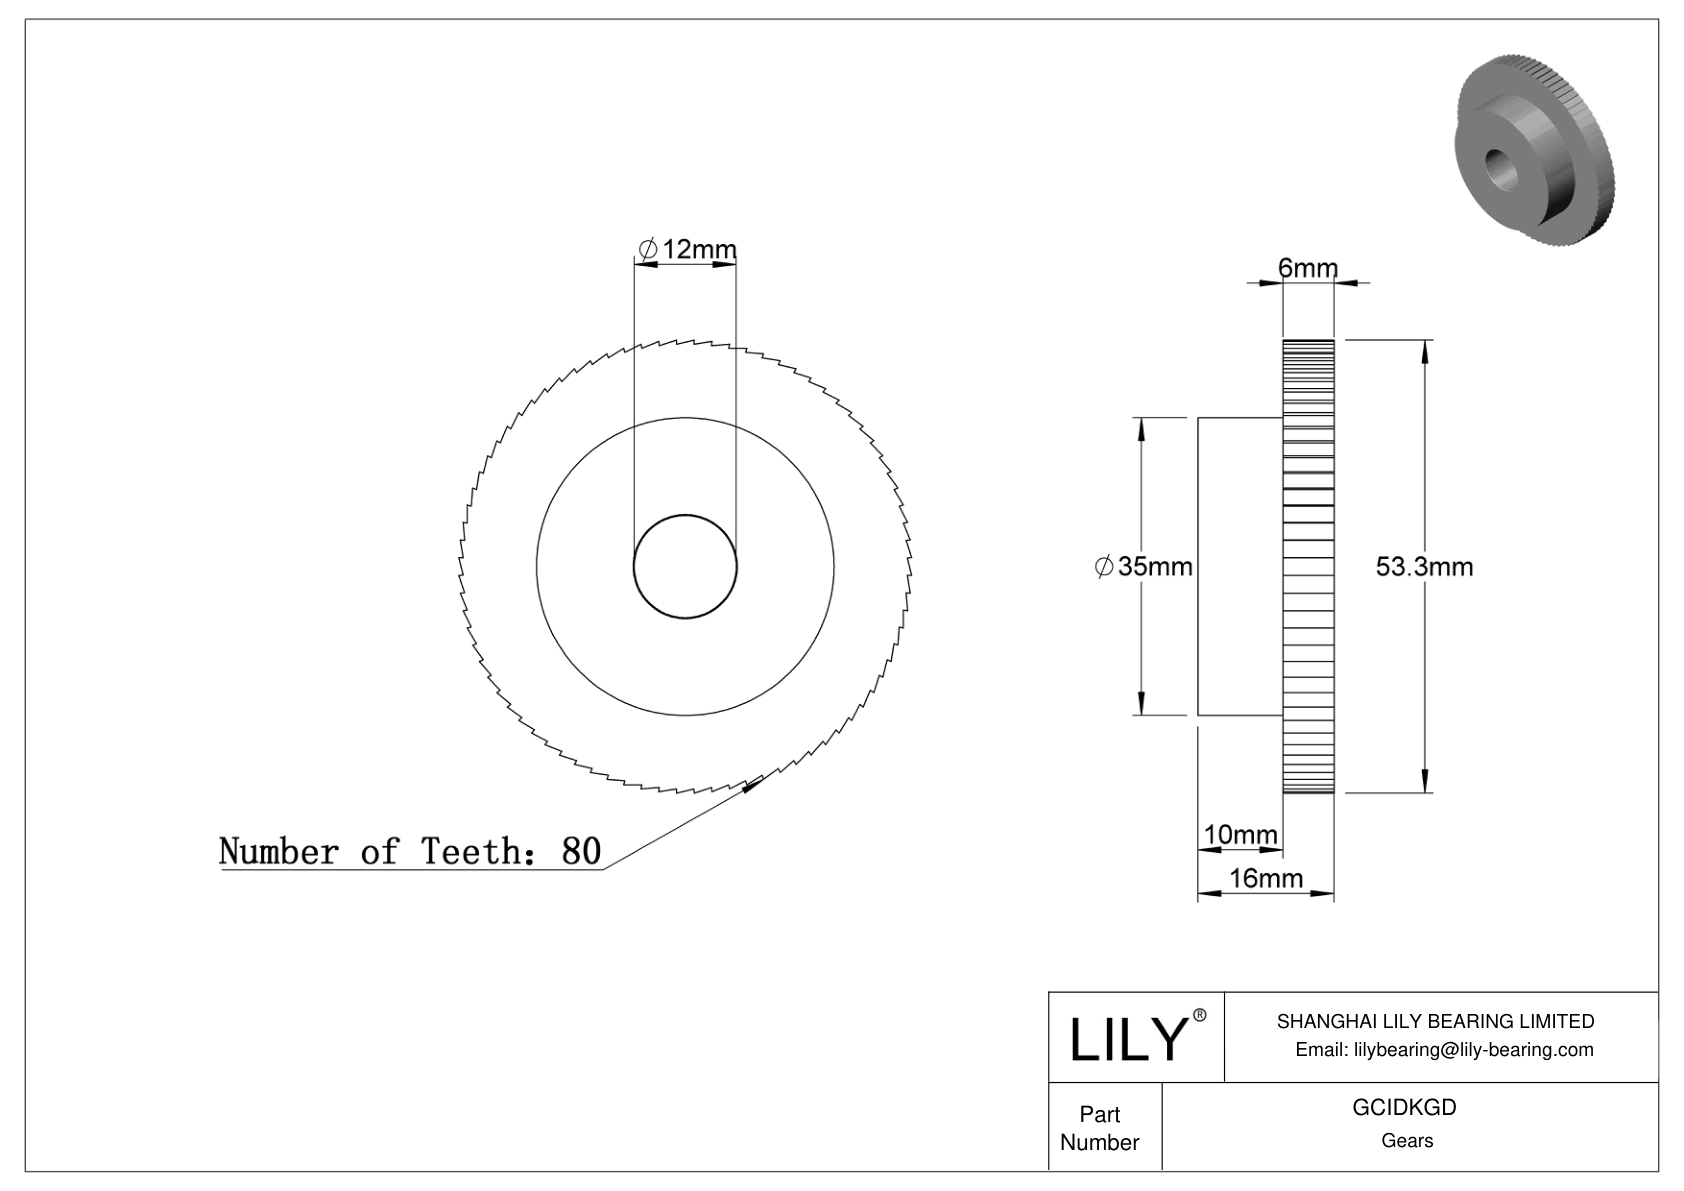 GCIDKGD Gears cad drawing